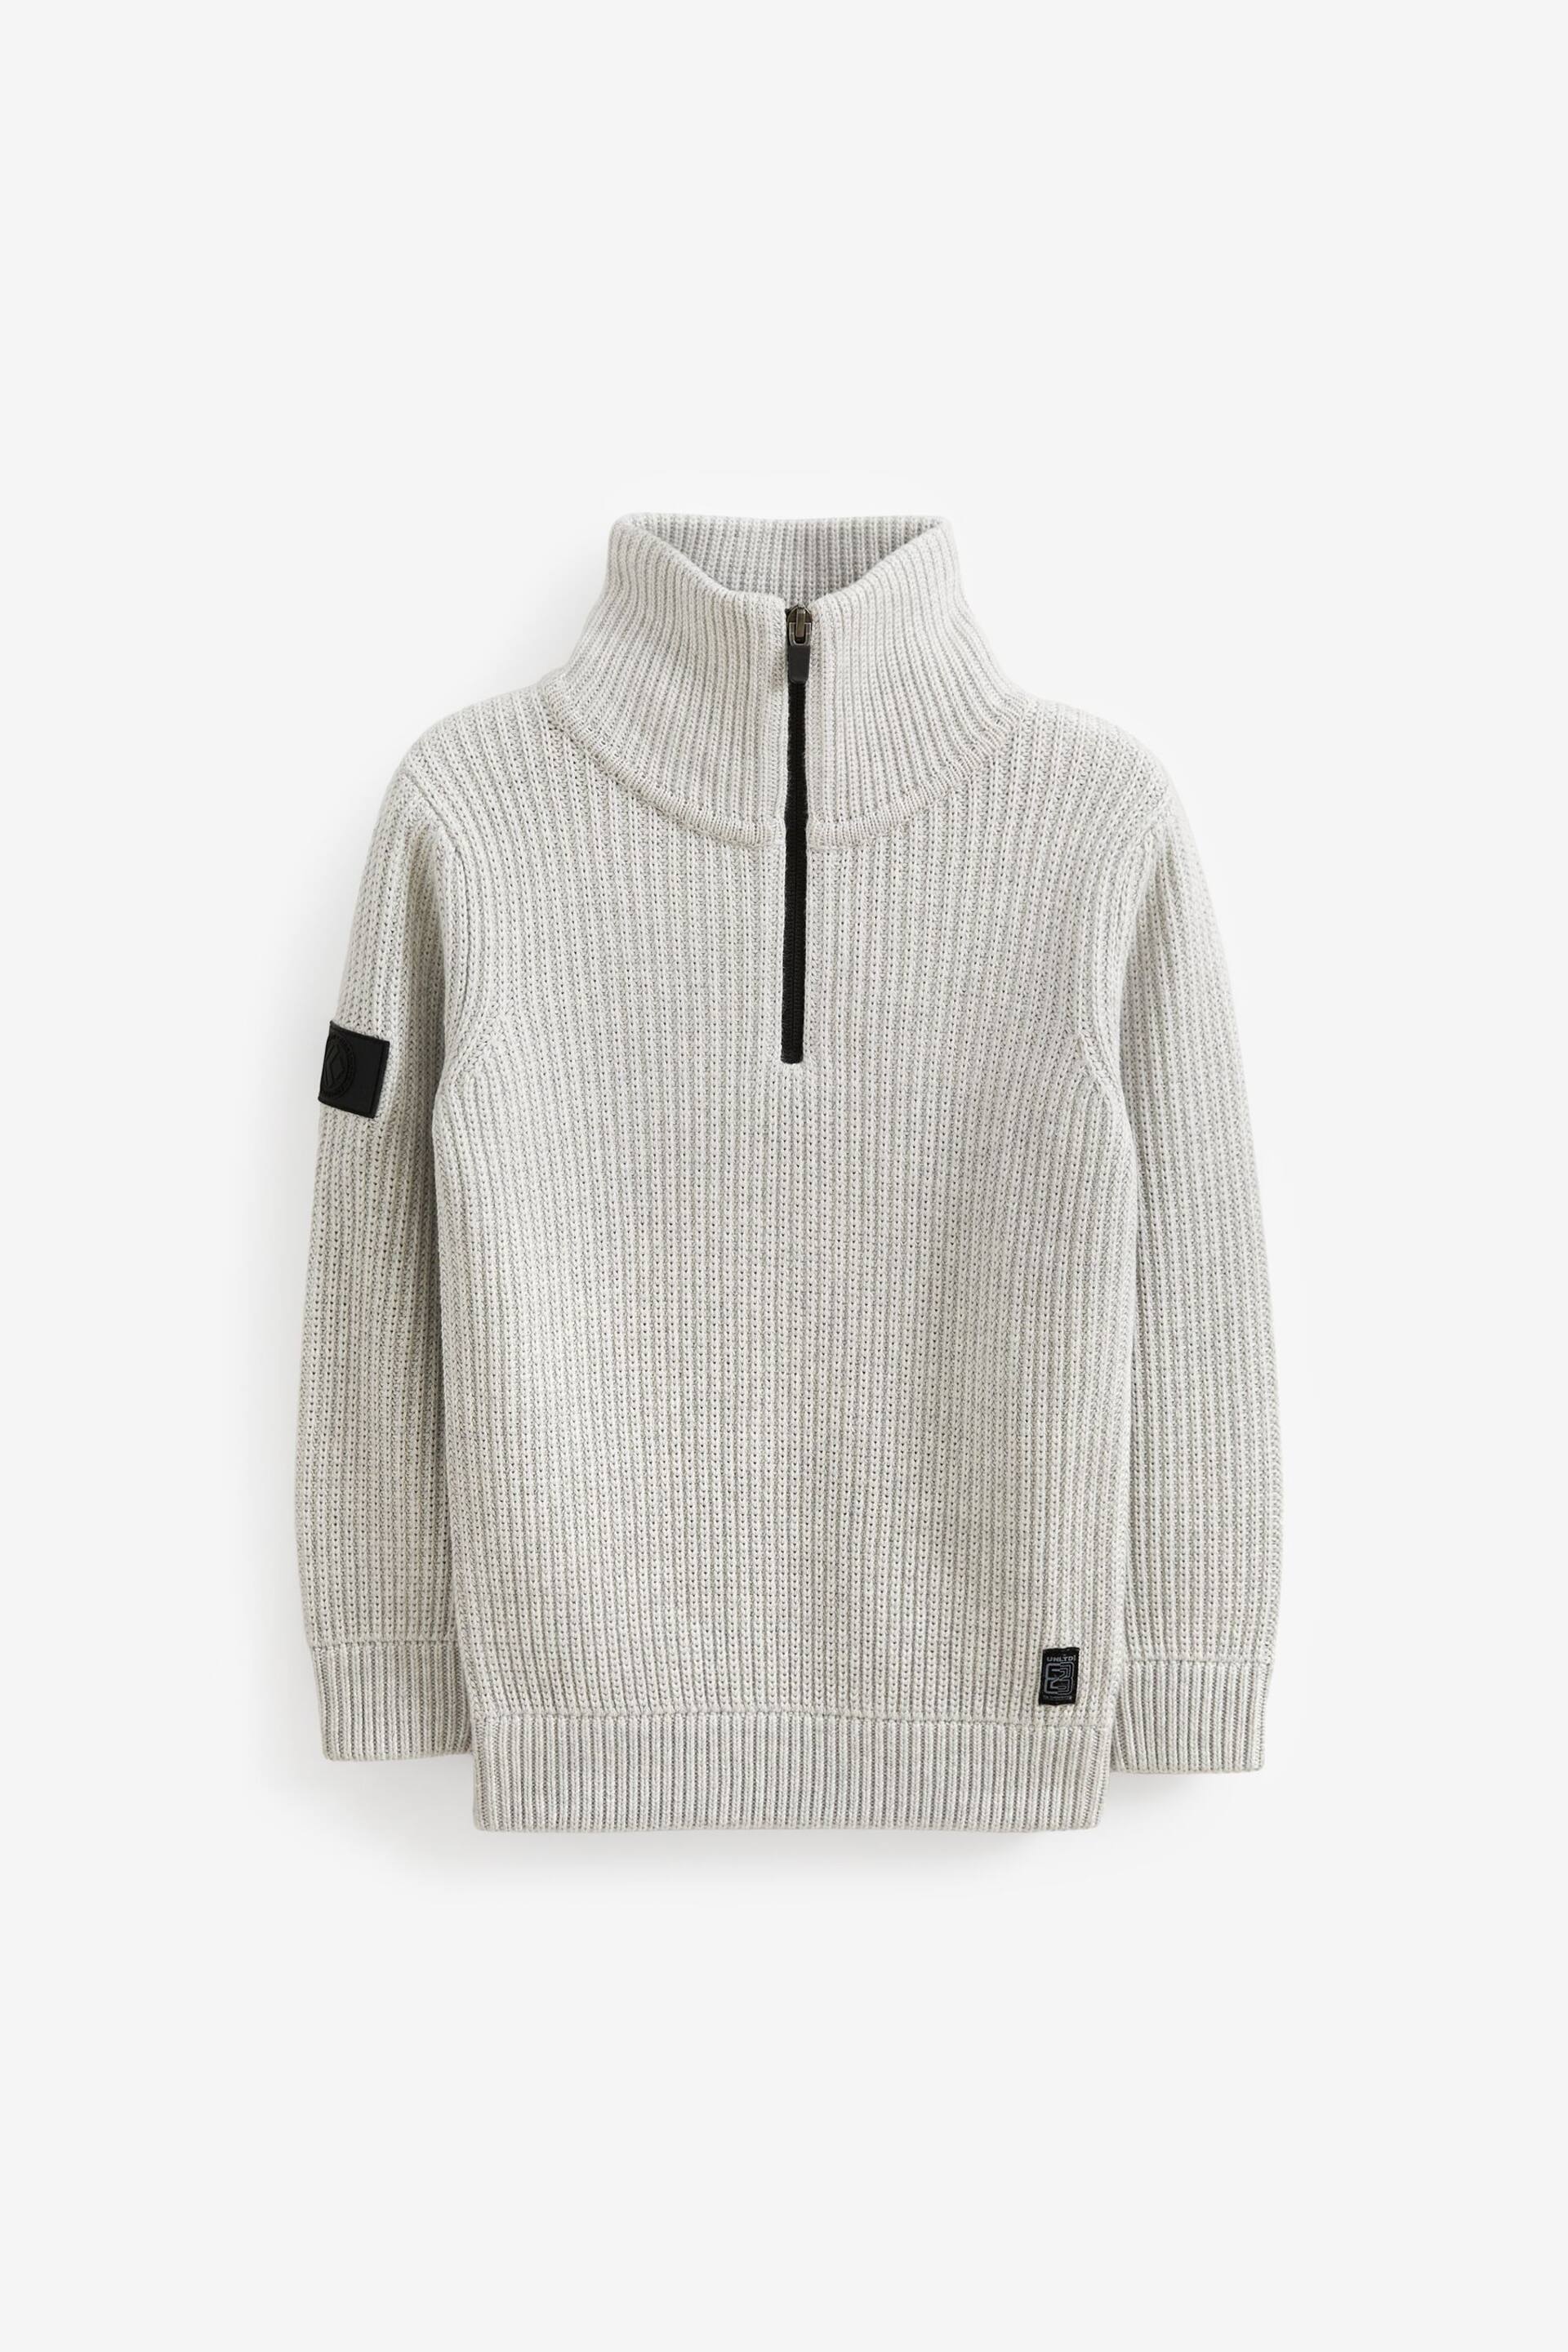 Grey Utility Zip Neck Jumper (3-16yrs) - Image 1 of 3